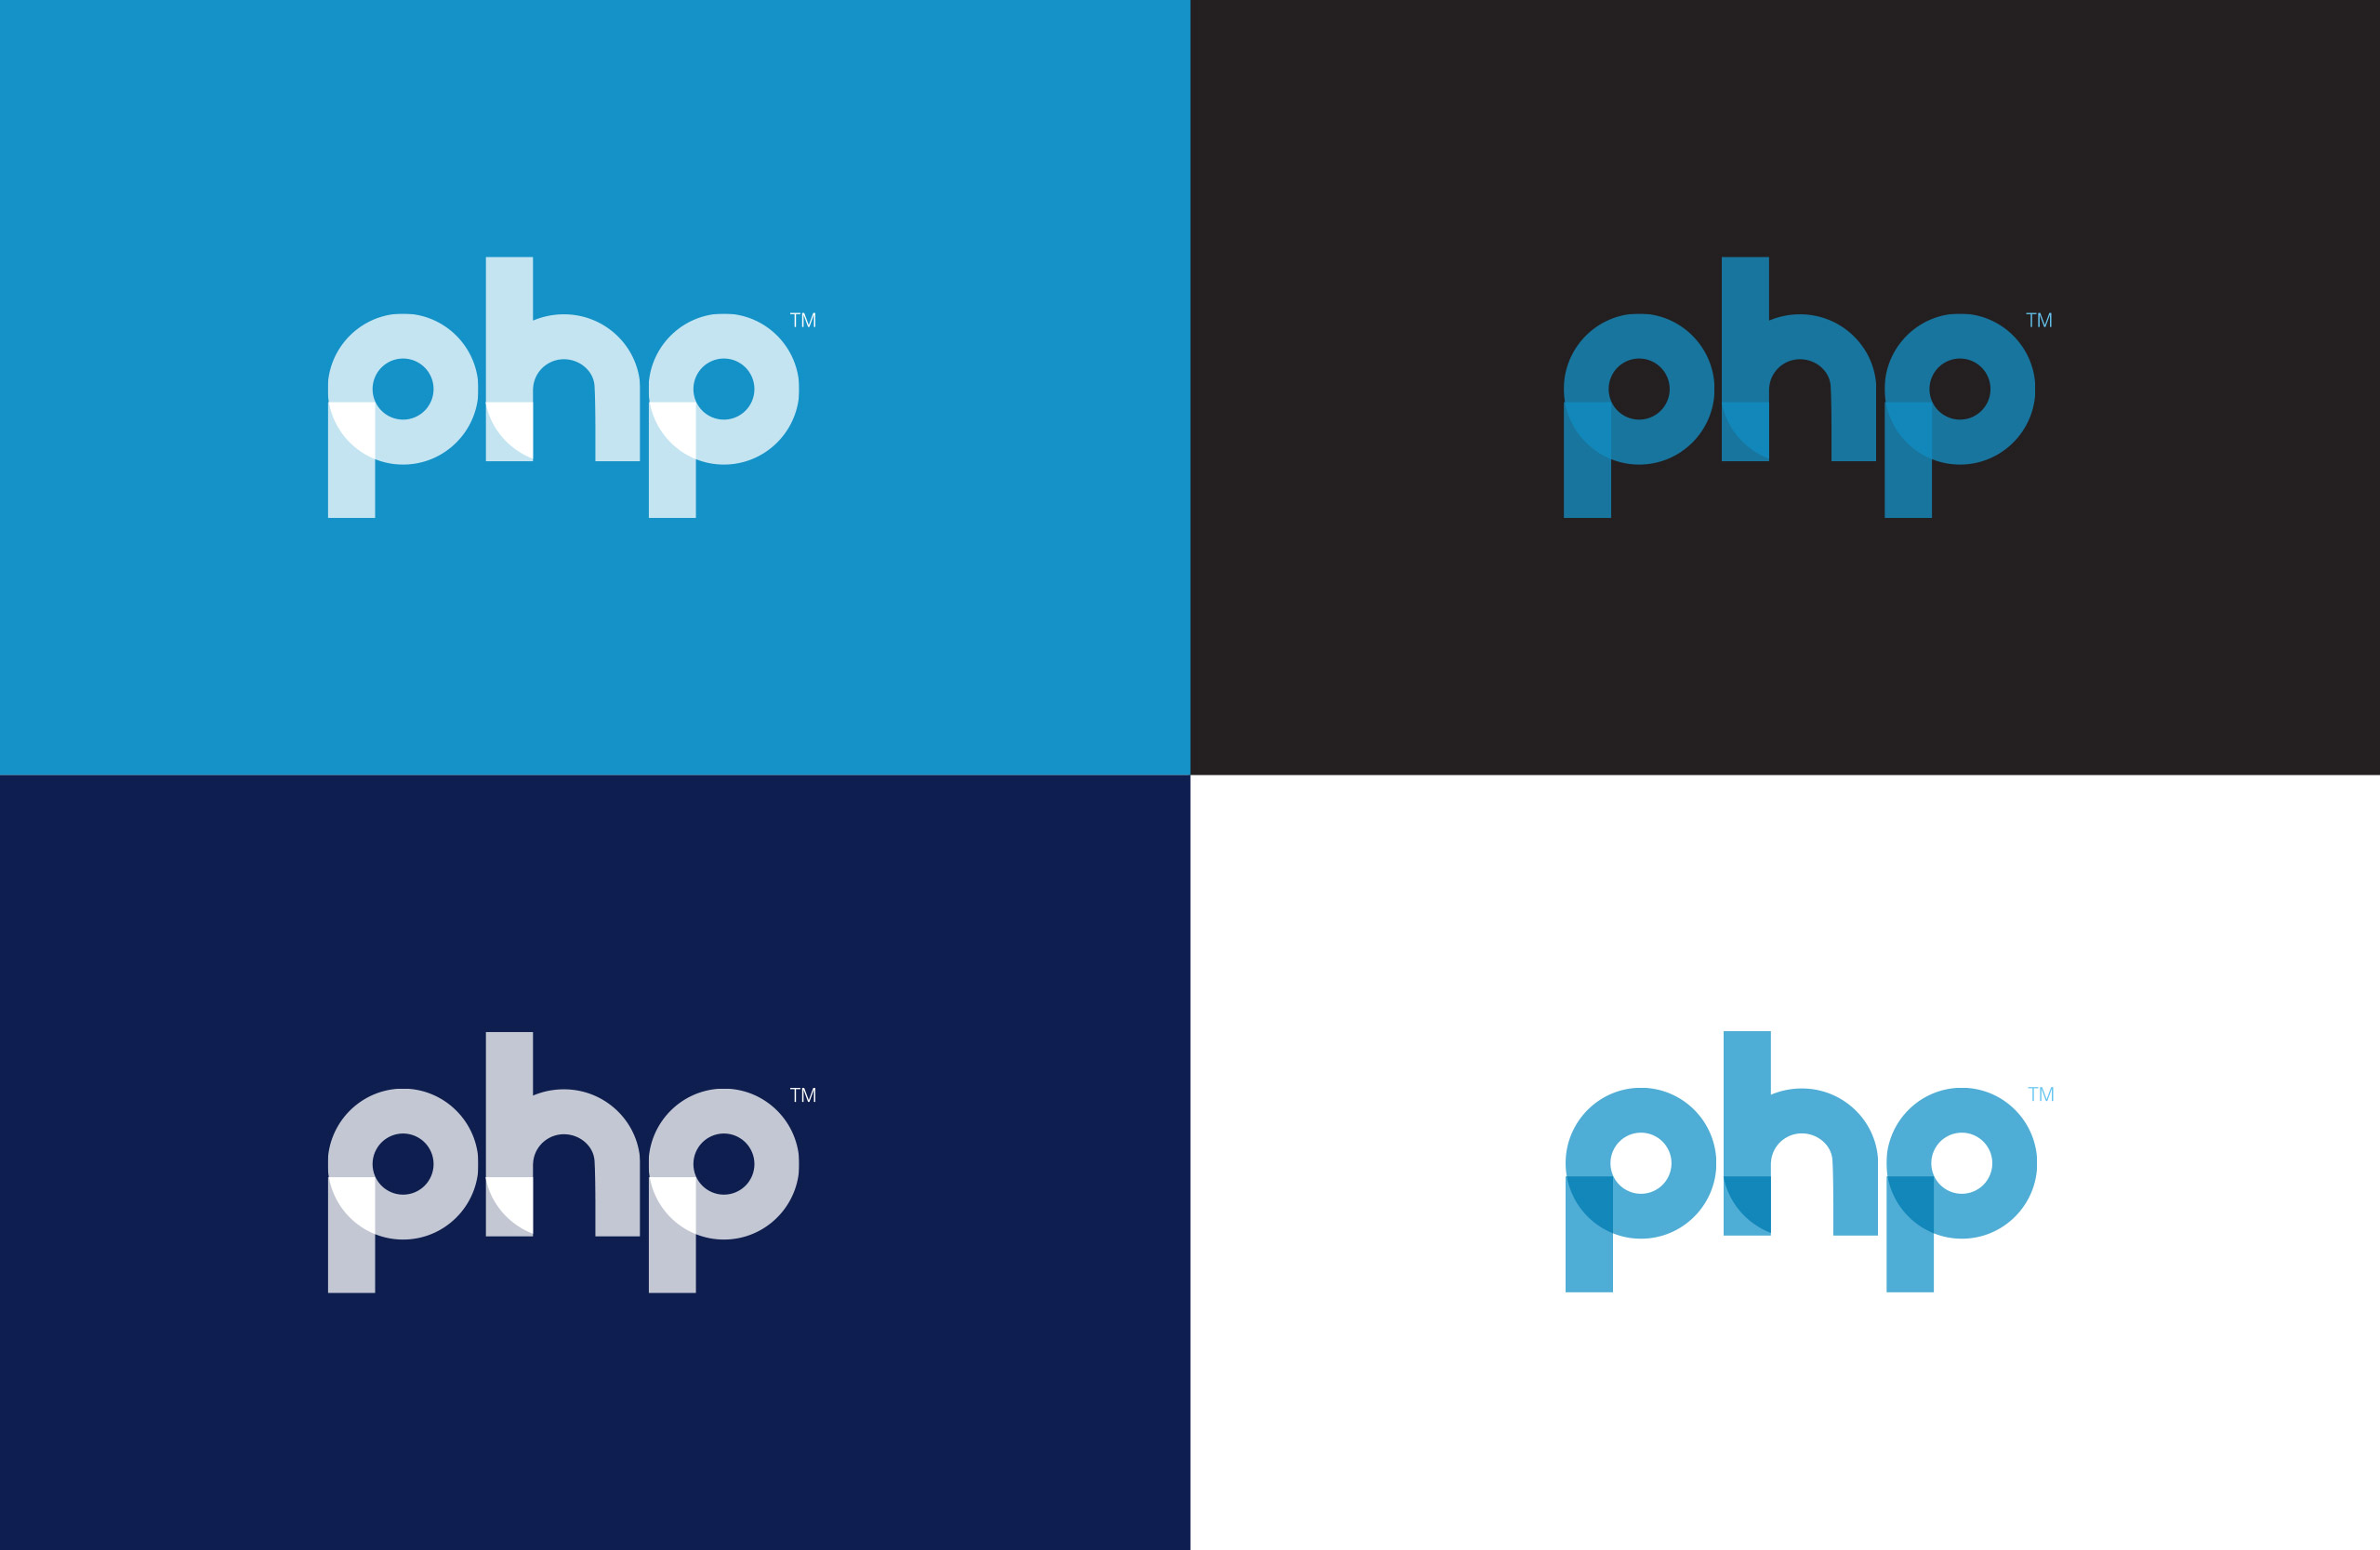 Healthcare client logos in blue, black, and white colors.